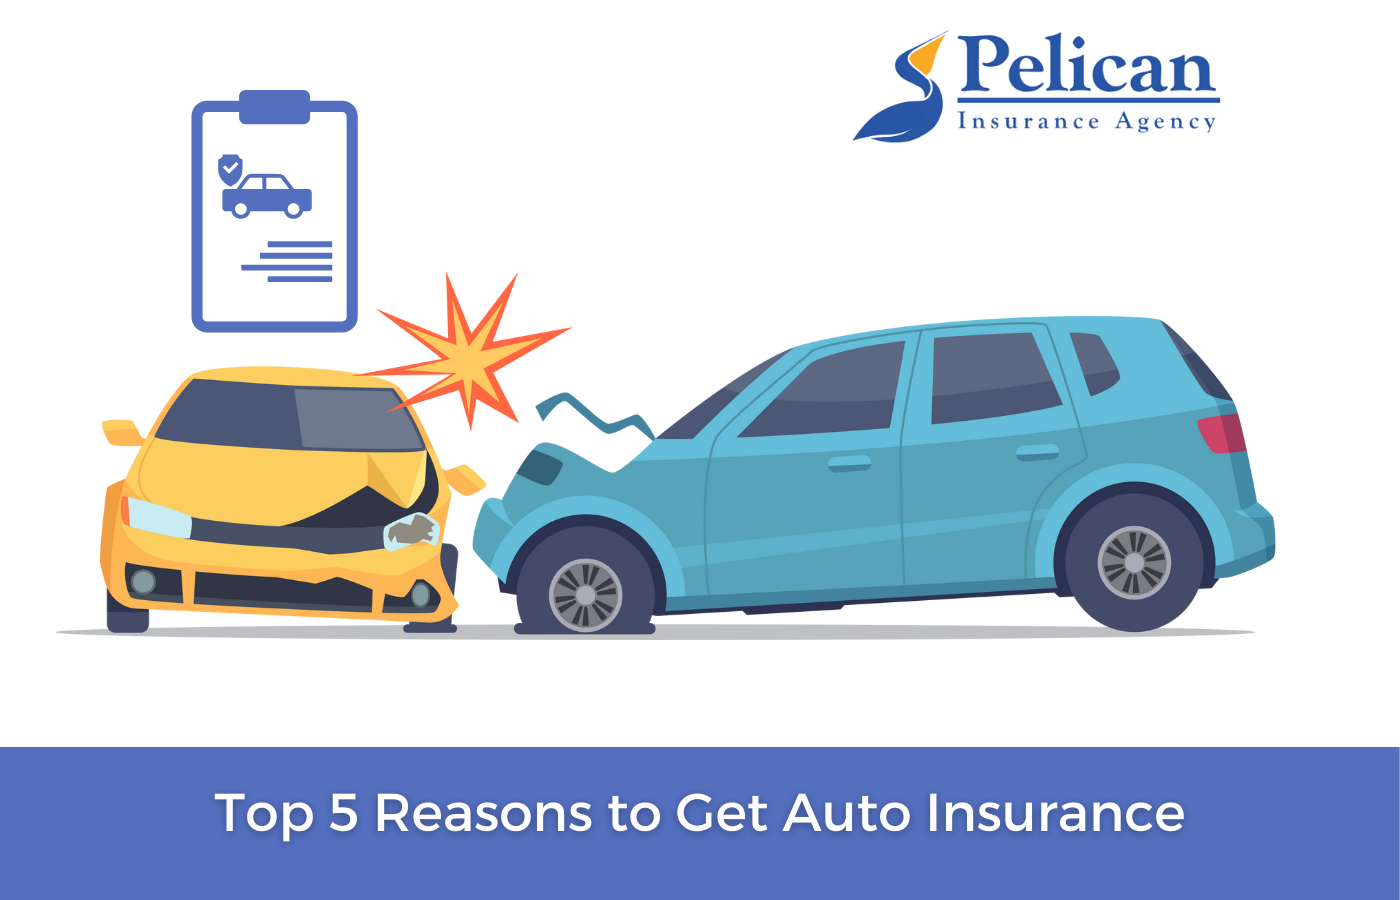 Top 5 Reasons to Get Auto Insurance